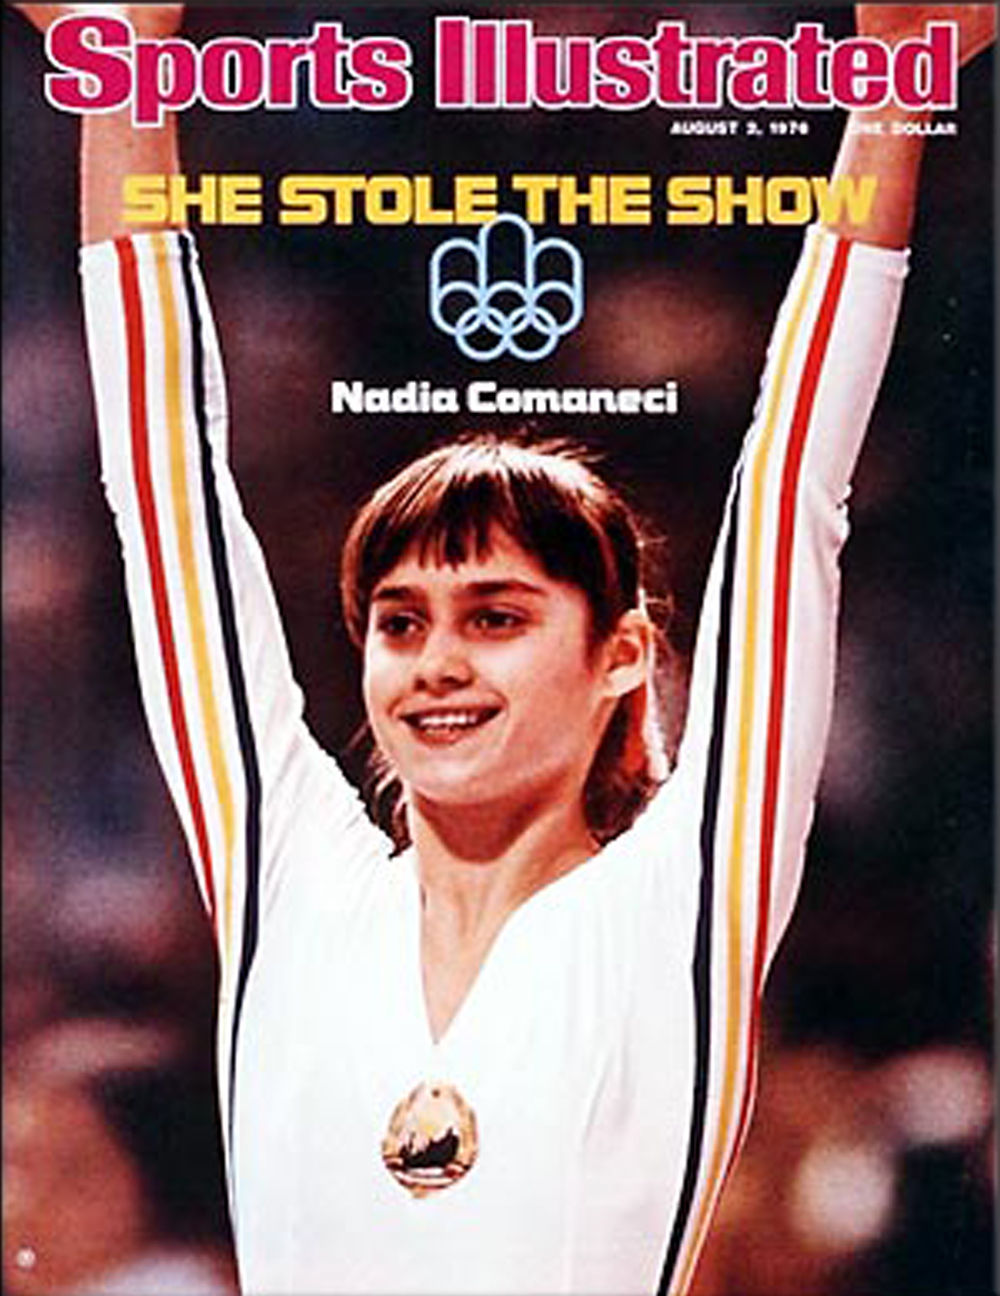 Nadia Comăneci became the first person in Olympic Games history to score a perfect 10 in gymnastics at the 1976 Summer Olympics